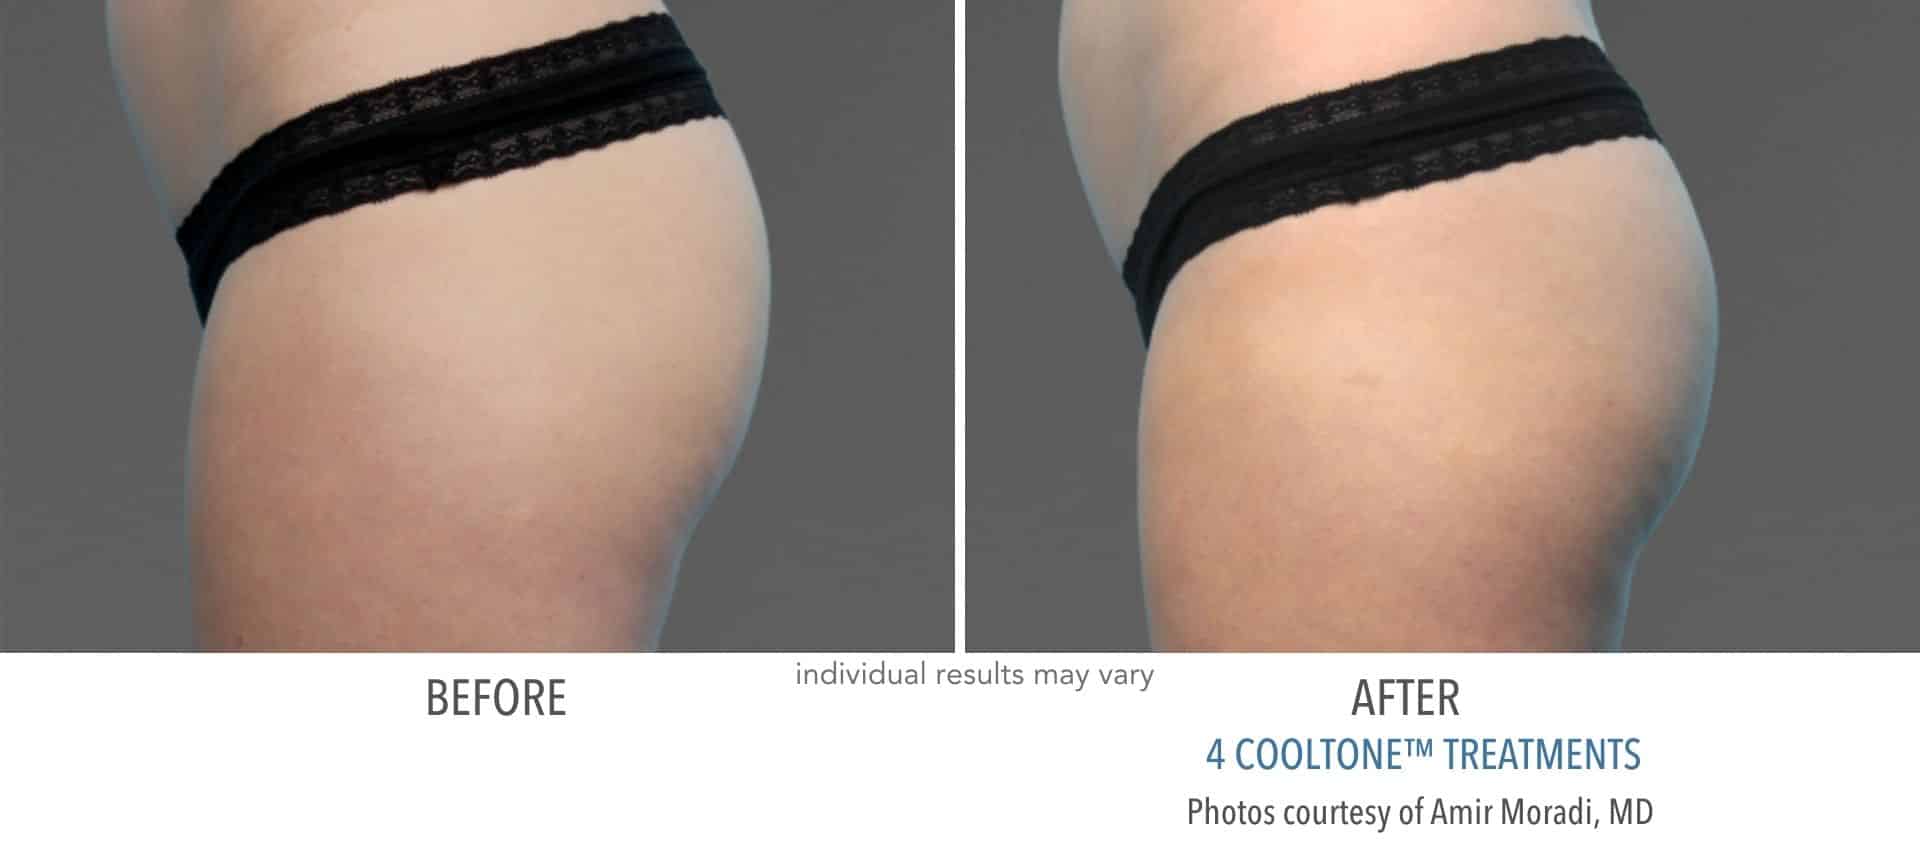 Buttocks before and after cooltone treatment at Sculpt DTLA in Los Angelas.